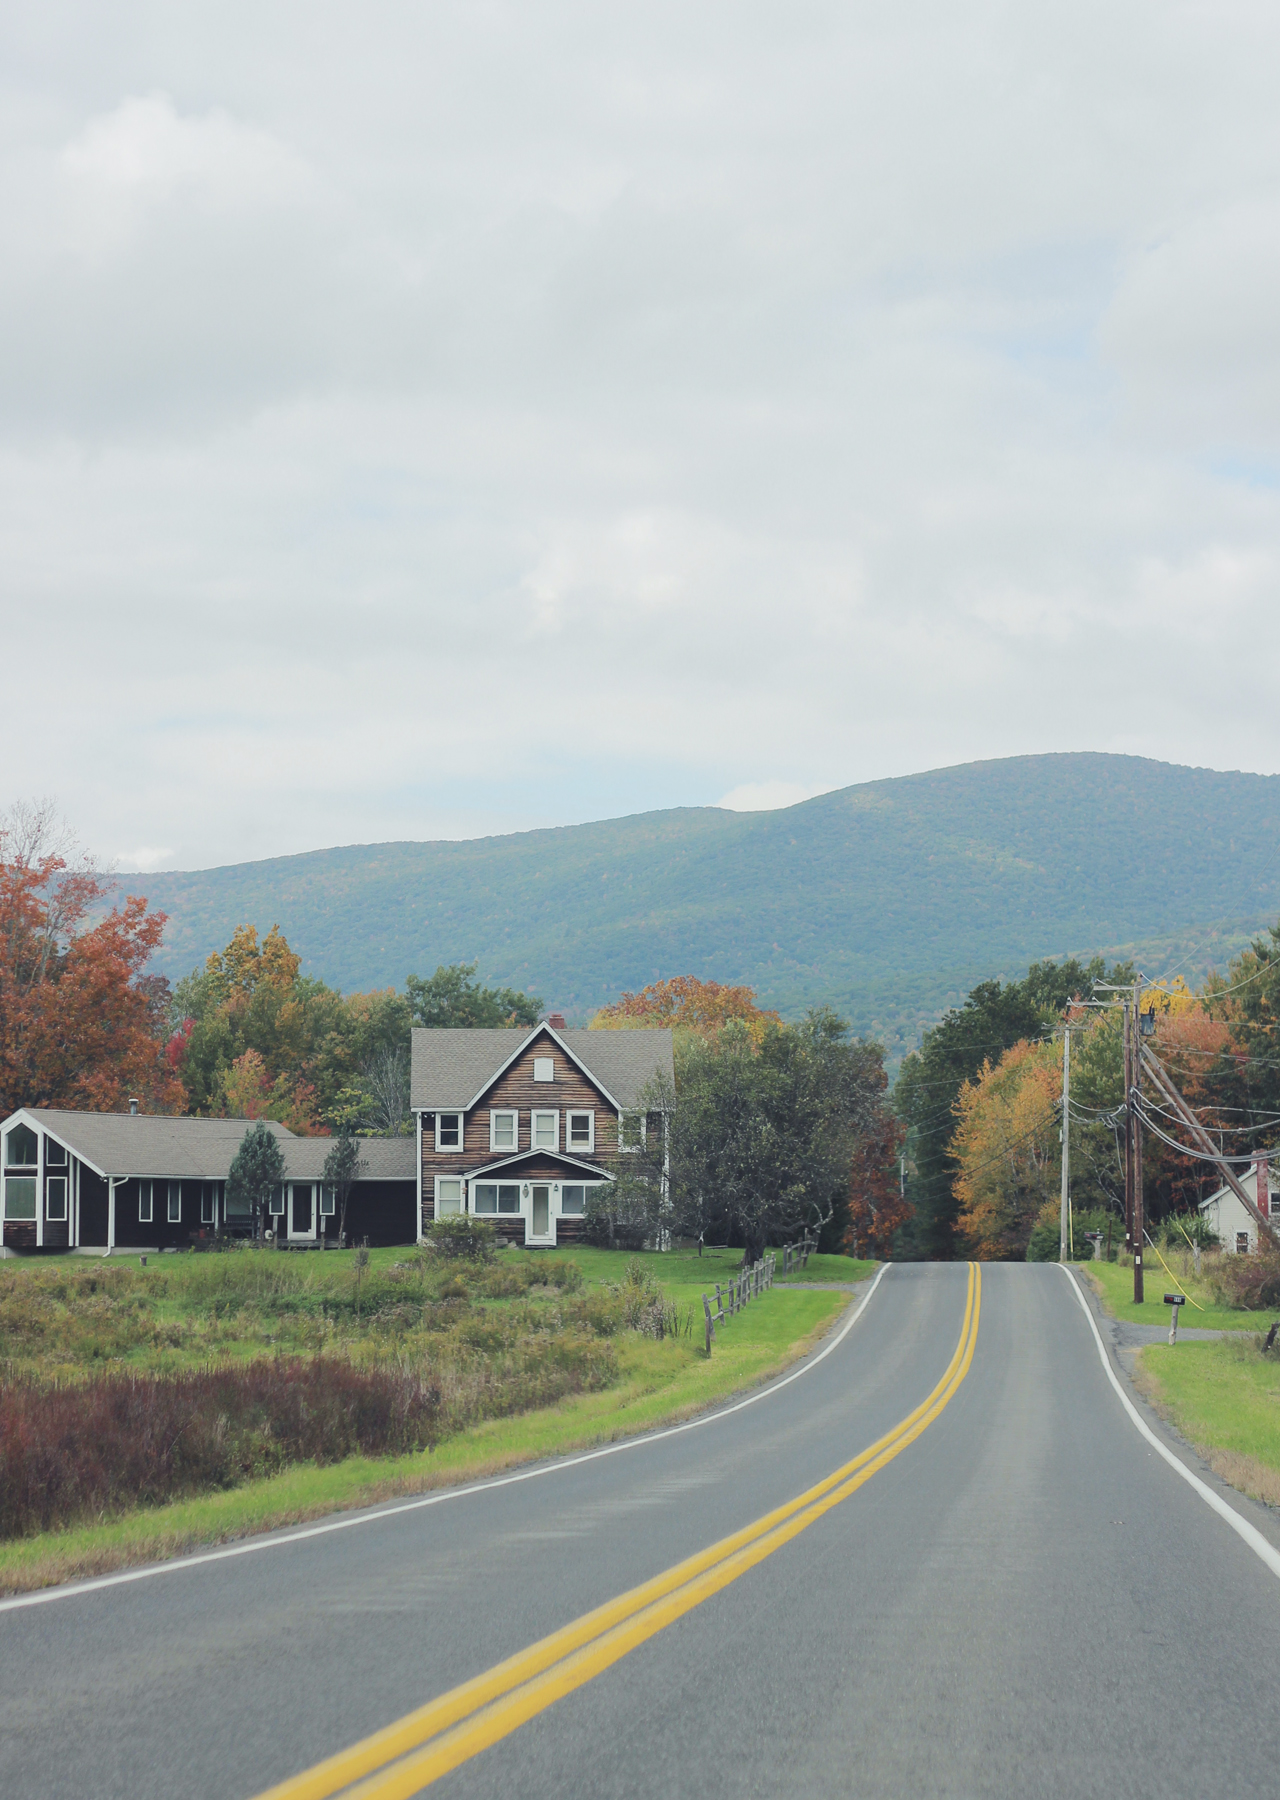 The Steele Maiden: Travel Guide to Upstate New York